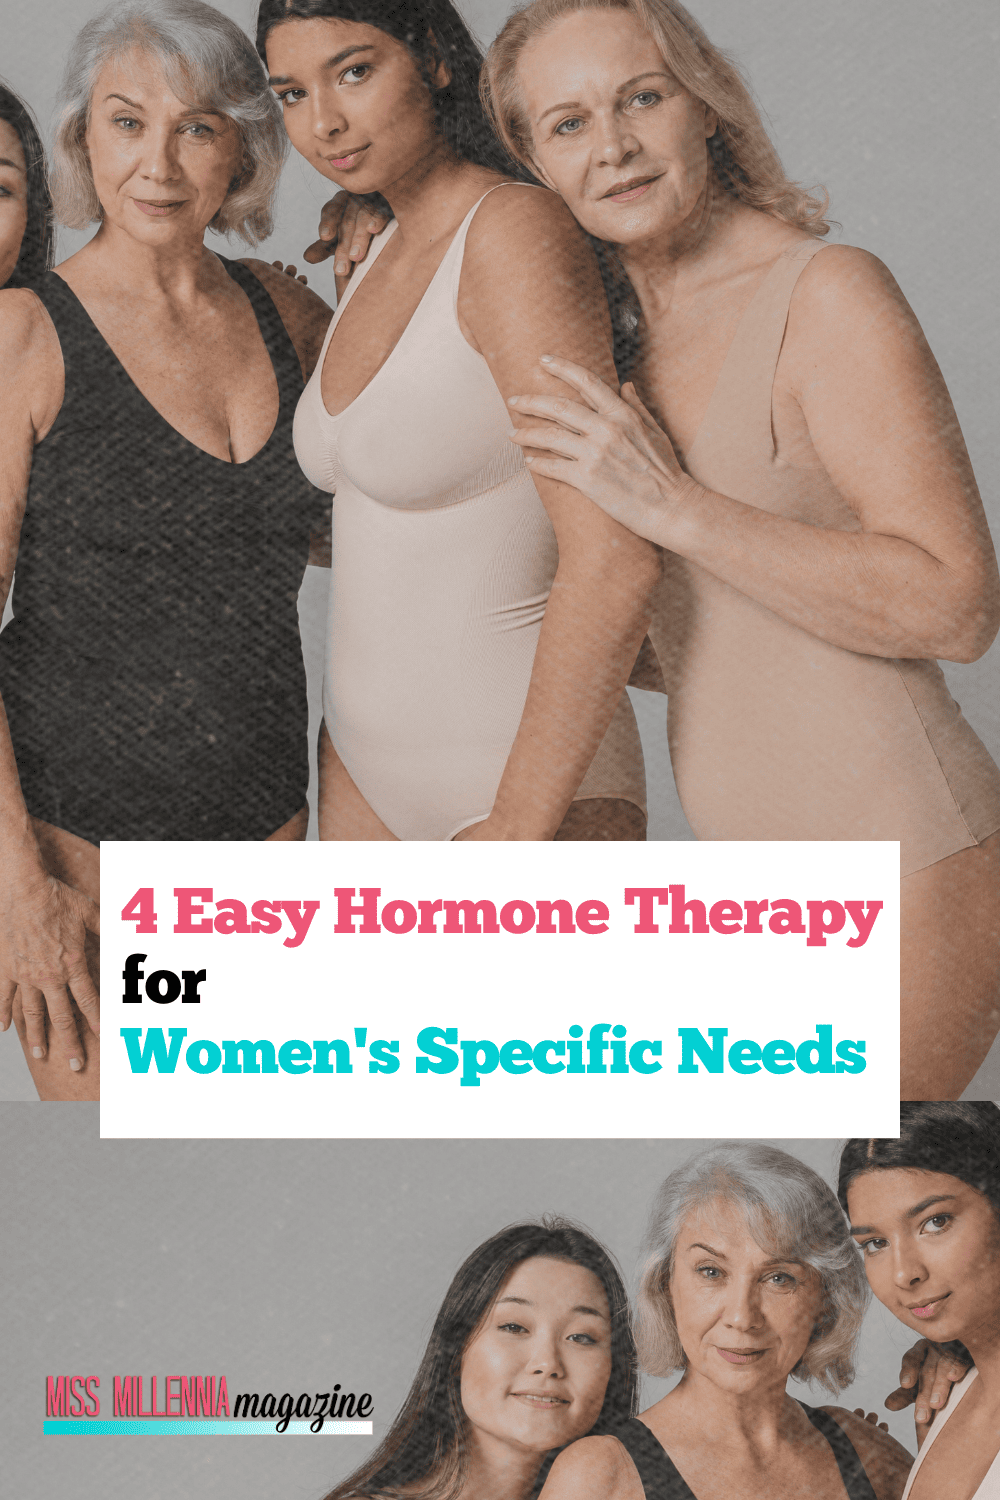 4 Easy Hormone Therapy for Women’s Specific Needs